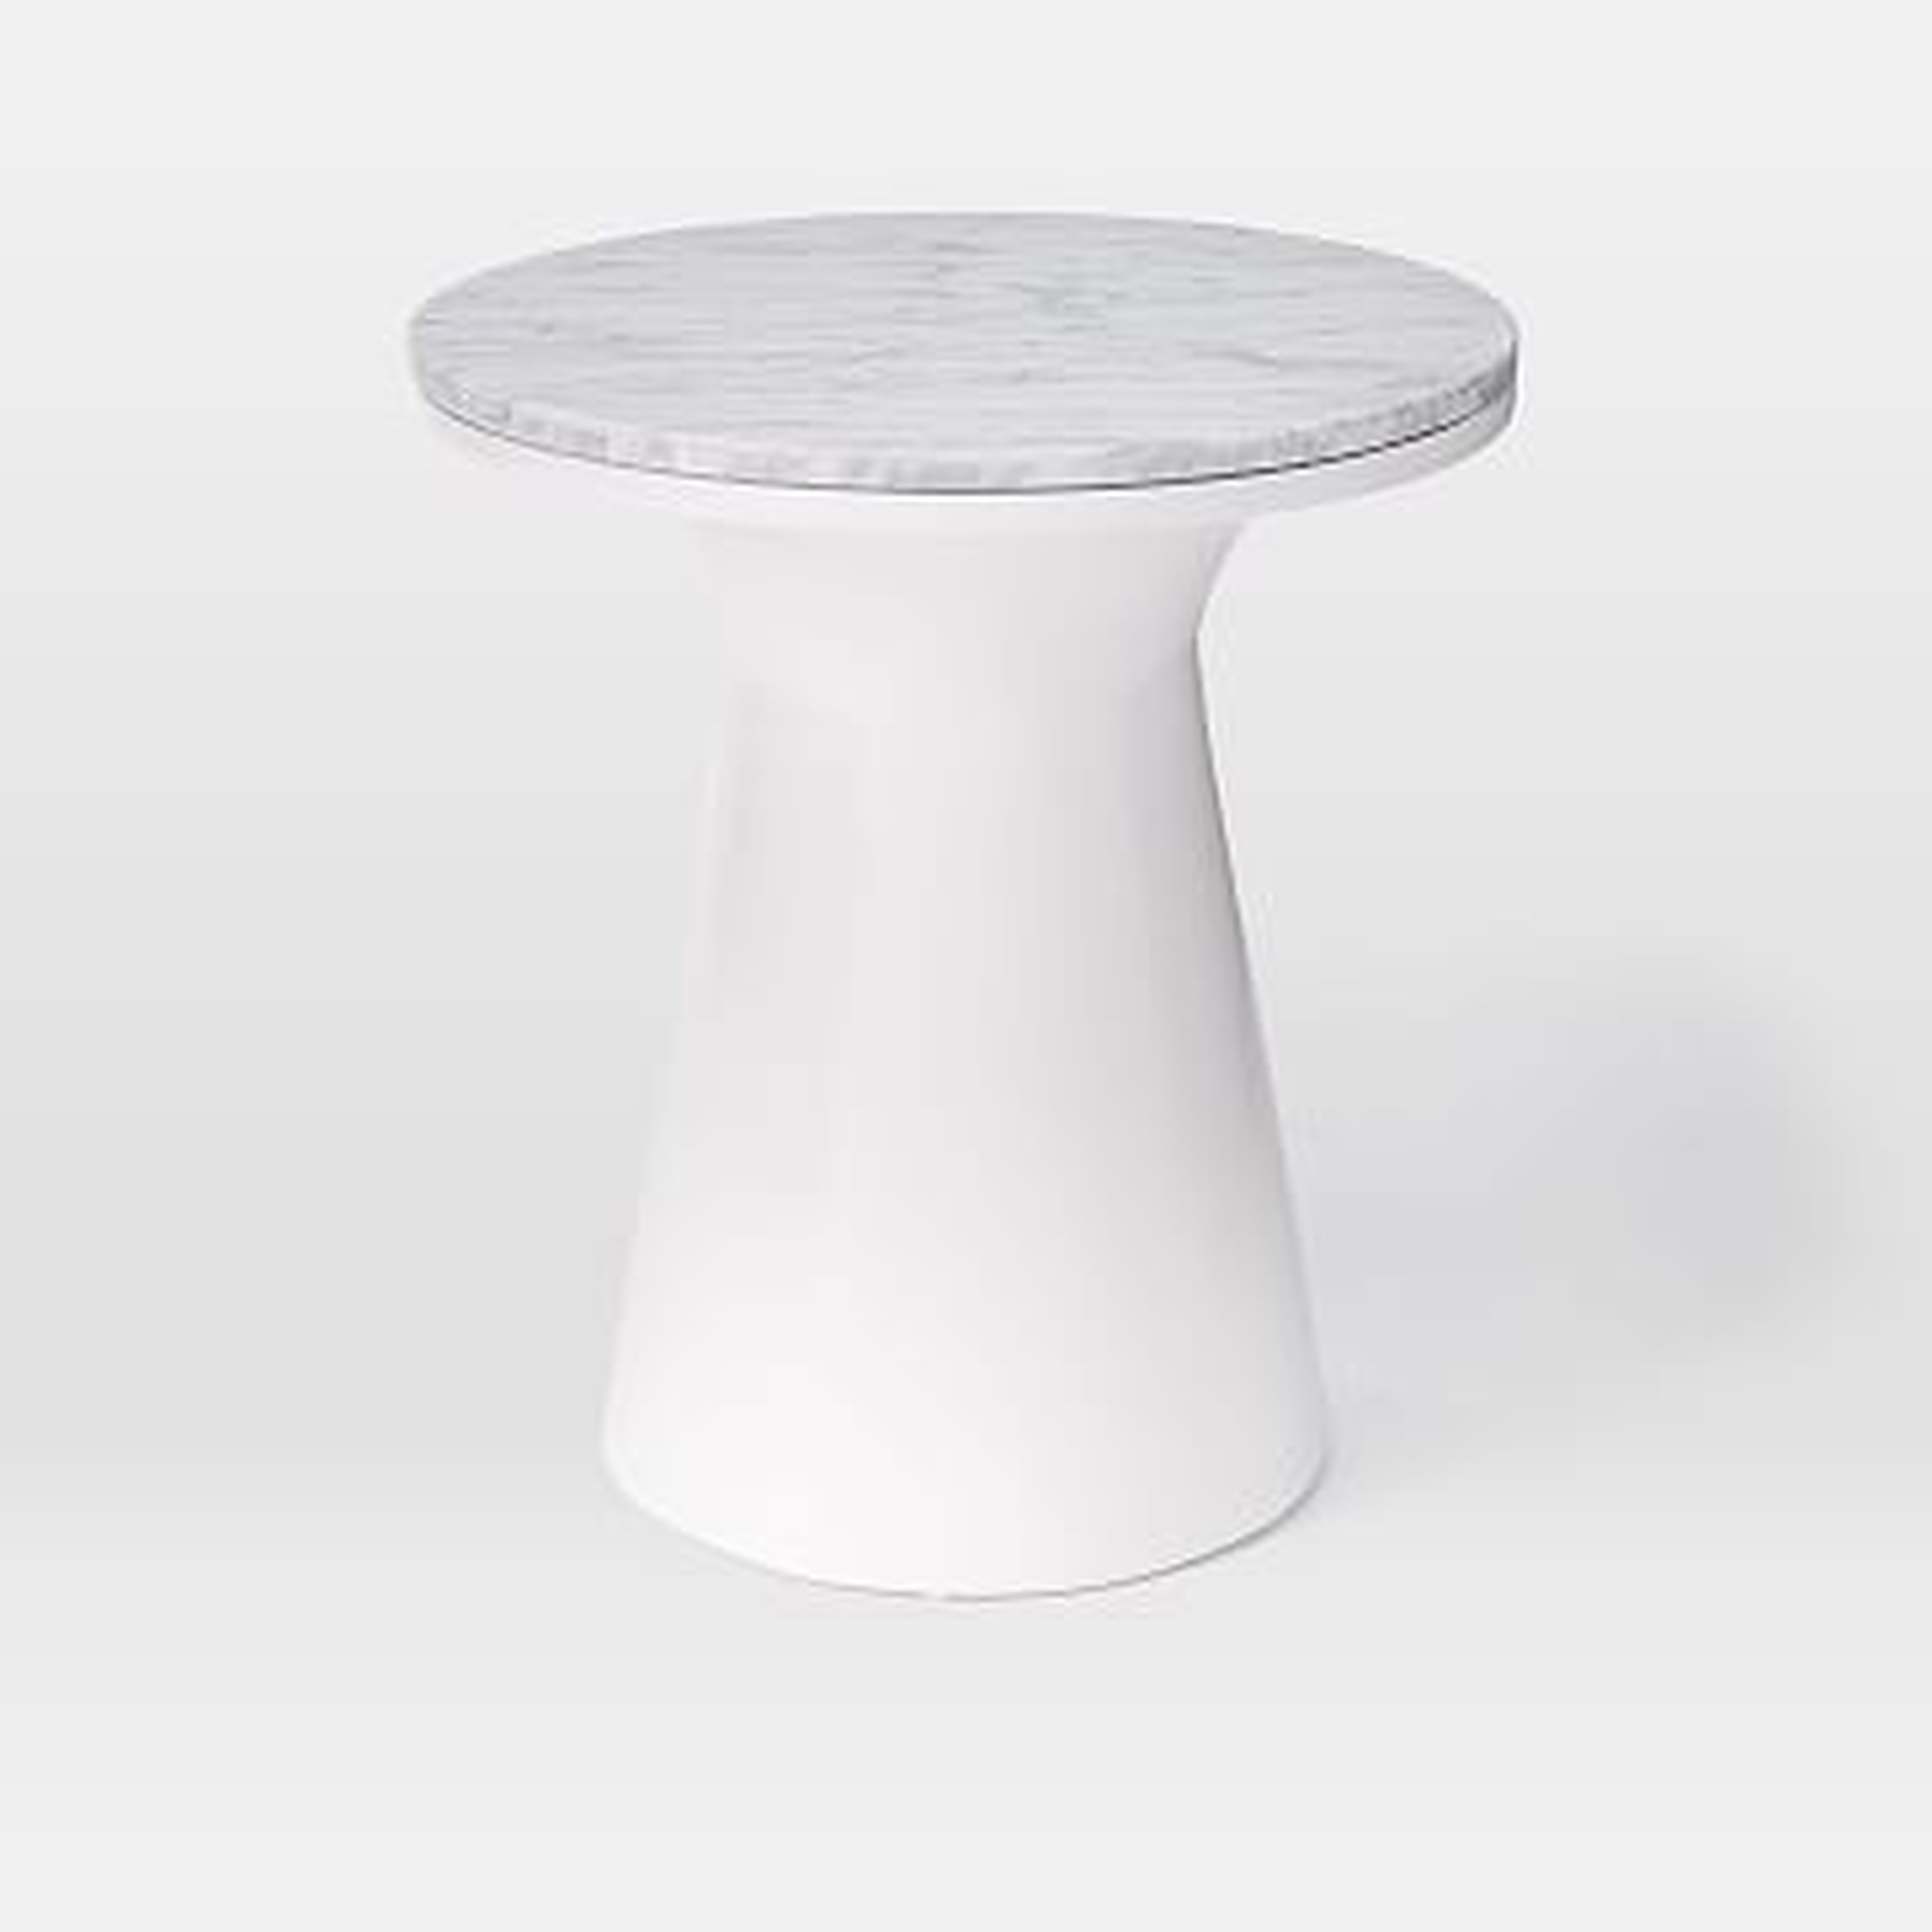 Marble Topped Pedestal Side Table - White Marble / White - West Elm